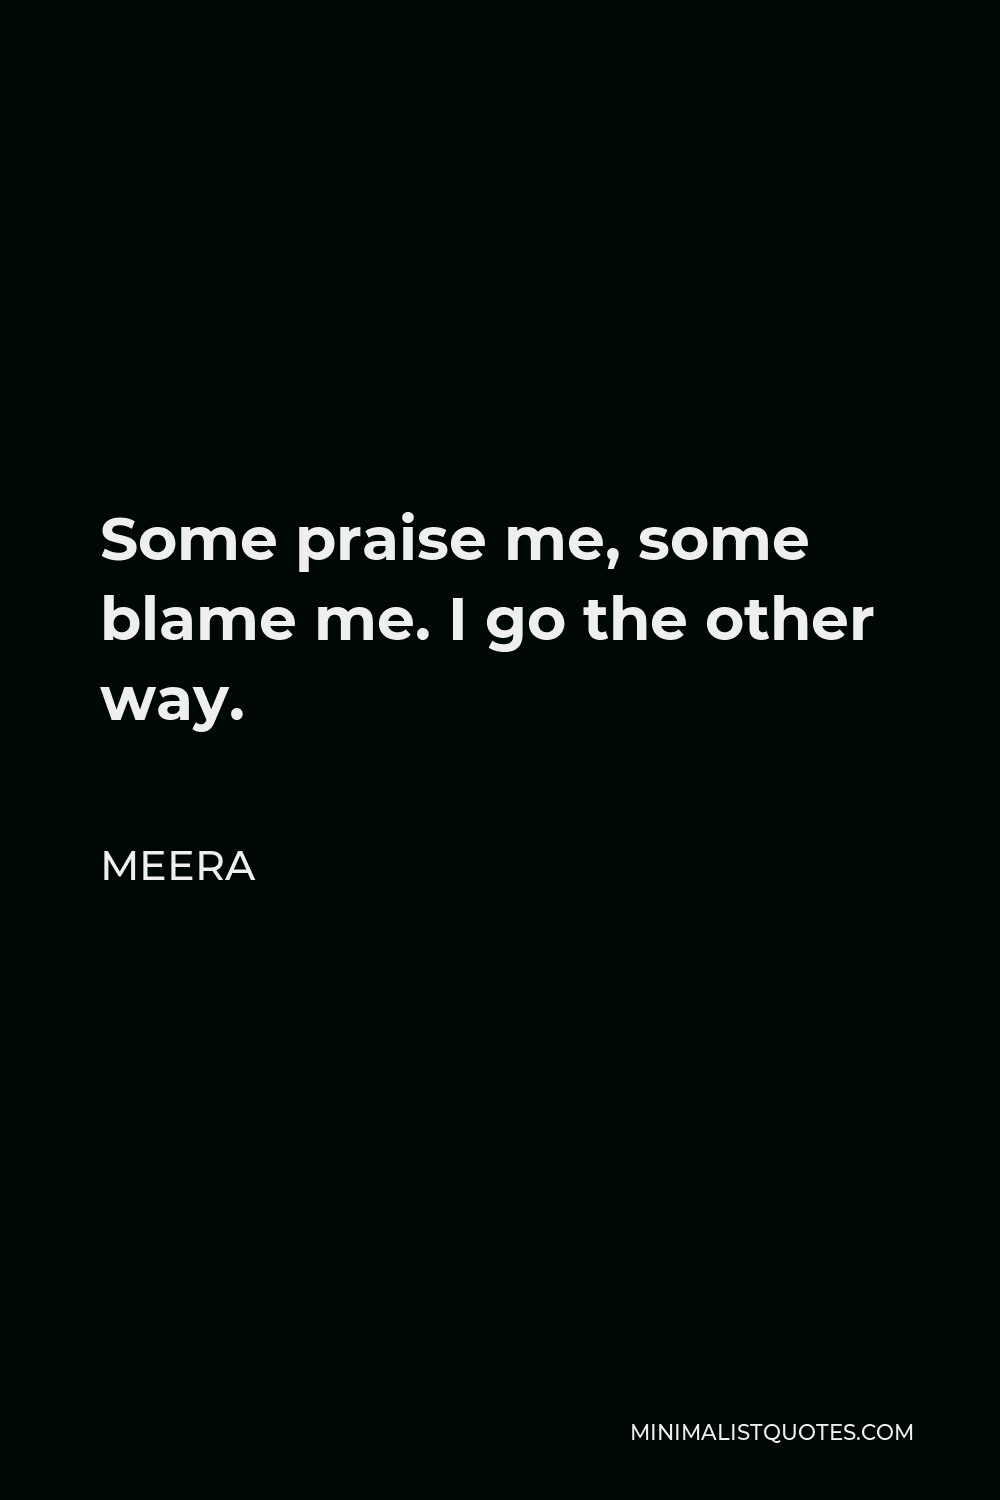 Meera Quote - Some praise me, some blame me. I go the other way.